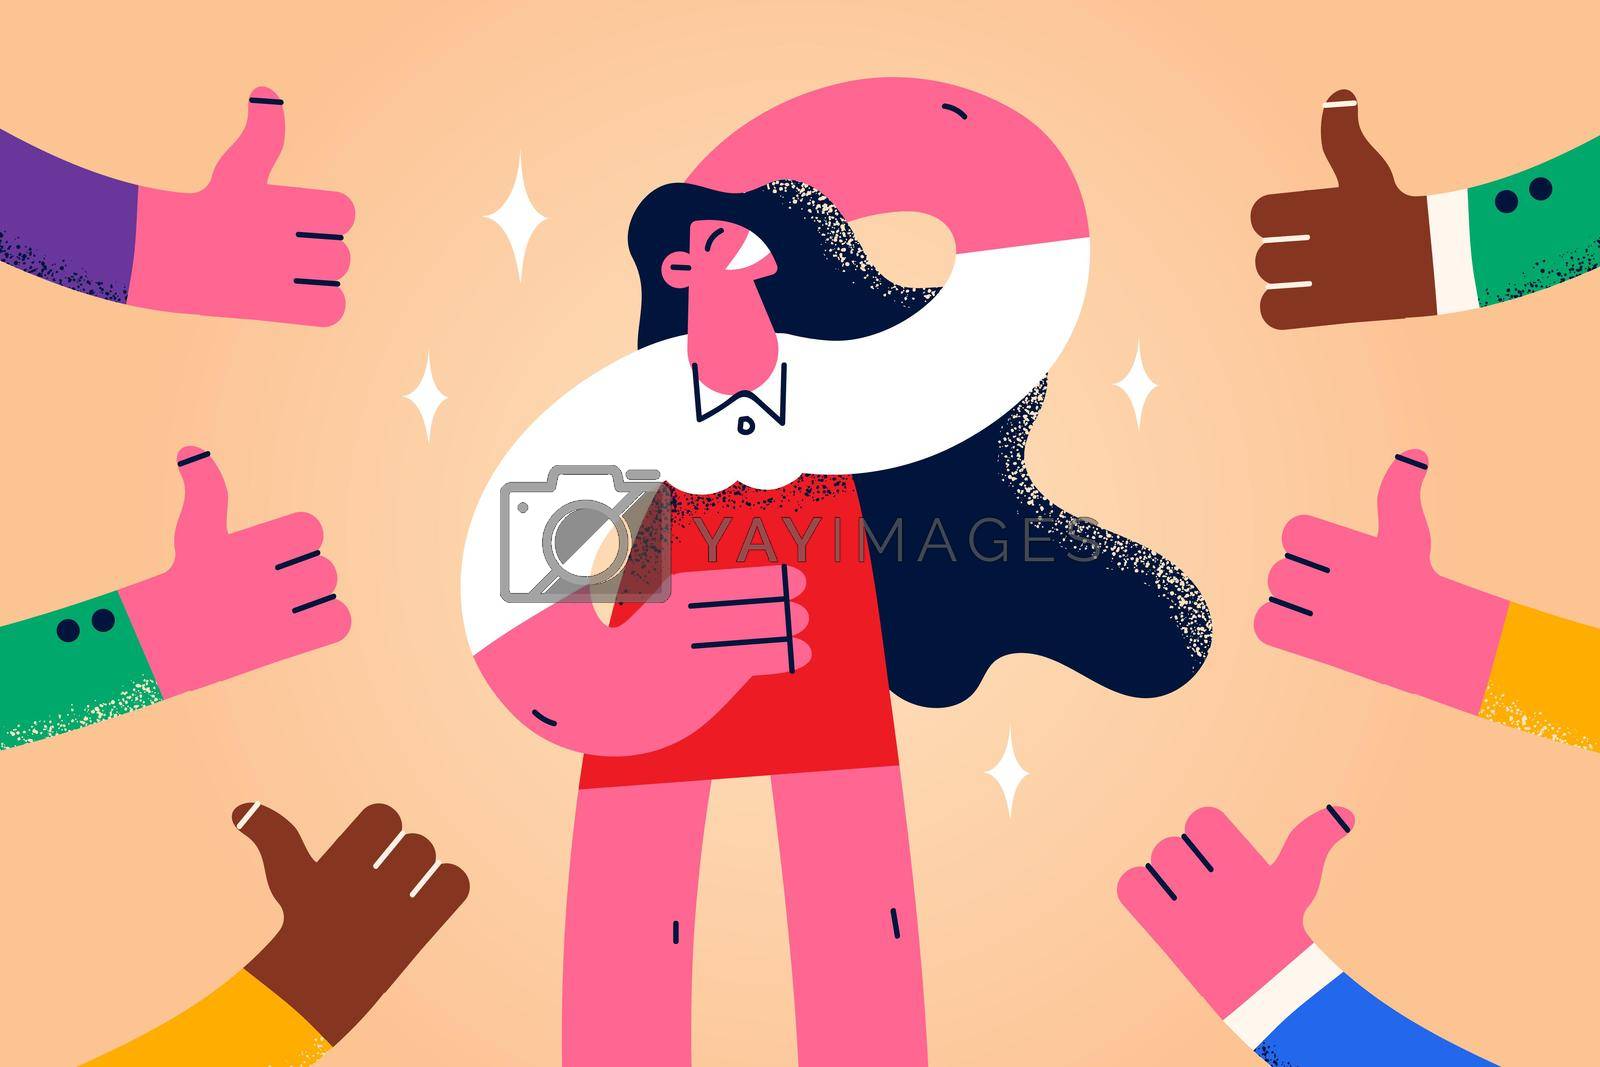 Diverse people show thumbs up to glamorous elegant woman. Smiling young girl feel popular get likes and feedback from subscribers in social media. Recognition, public popularity. Vector illustration.